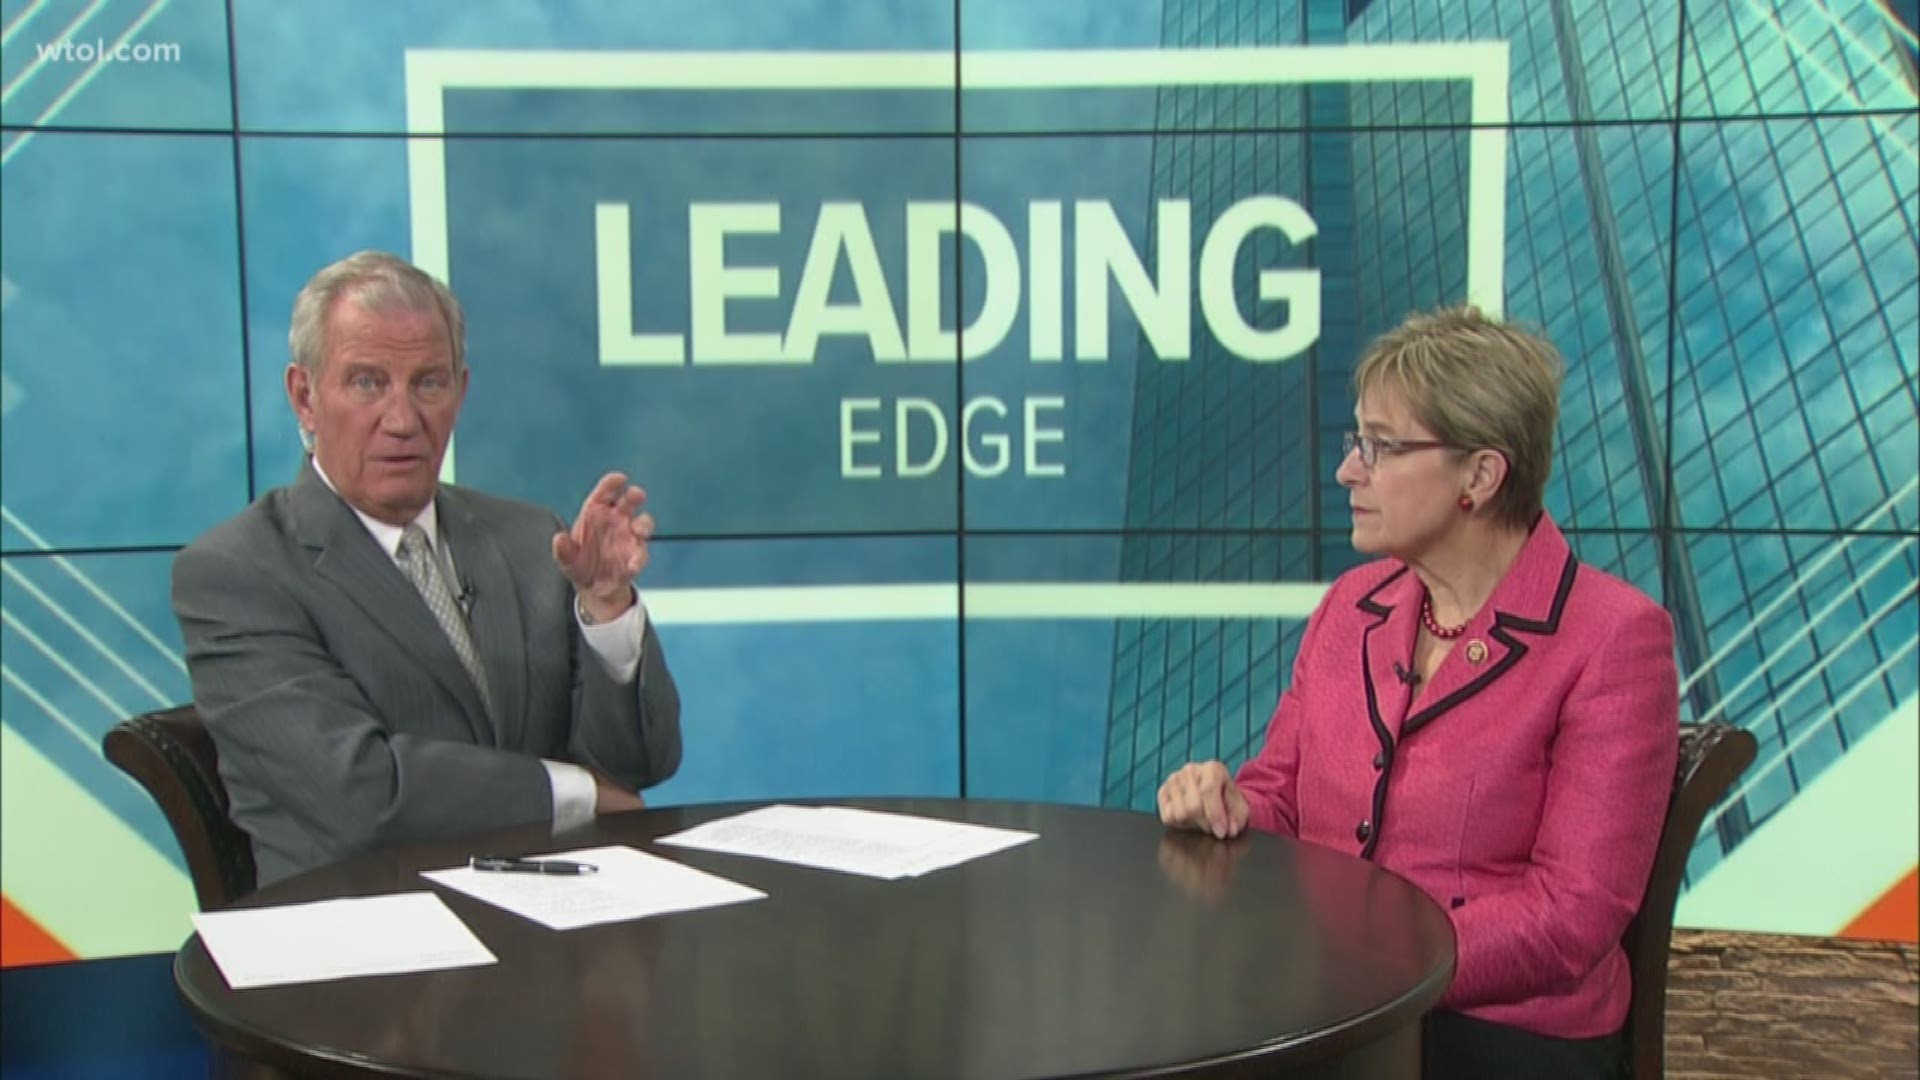 Jerry Anderson sits down with Representative Marcy Kaptur (D-OH) at the Leading Edge table.